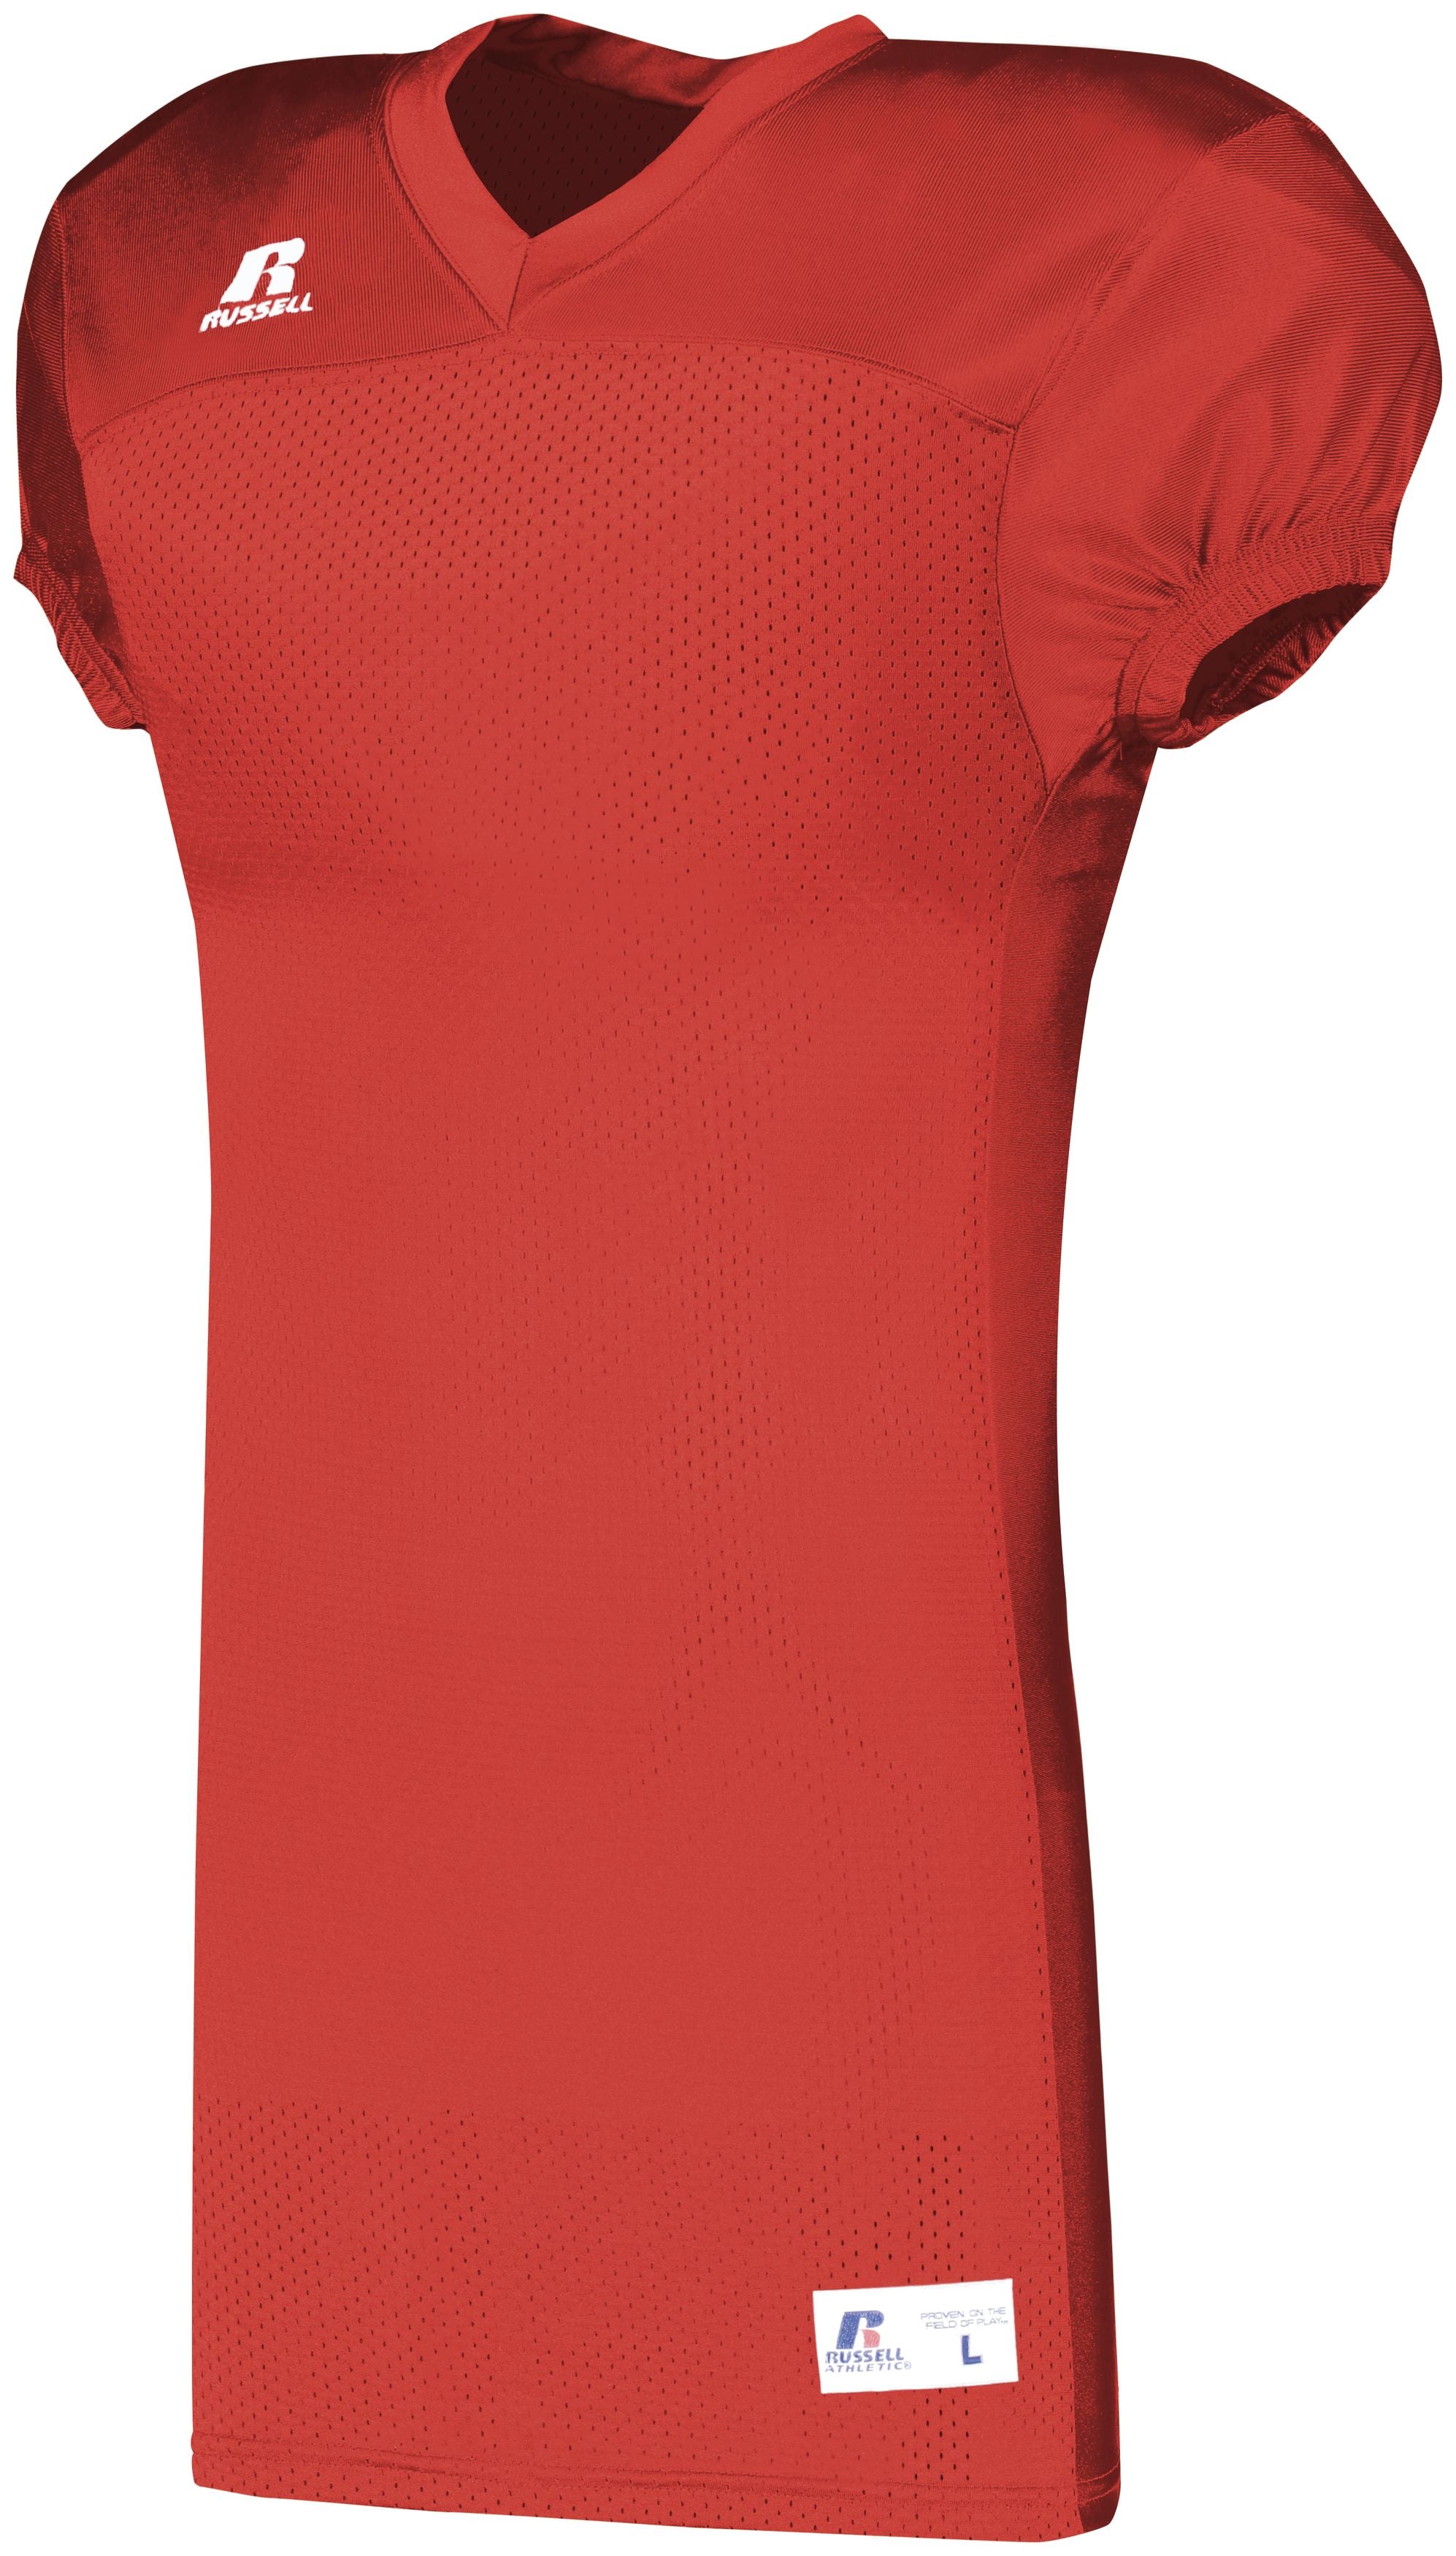 Russell Athletic Youth Solid Jersey With Side Inserts in True Red  -Part of the Youth, Youth-Jersey, Football, Russell-Athletic-Products, Shirts, All-Sports, All-Sports-1 product lines at KanaleyCreations.com